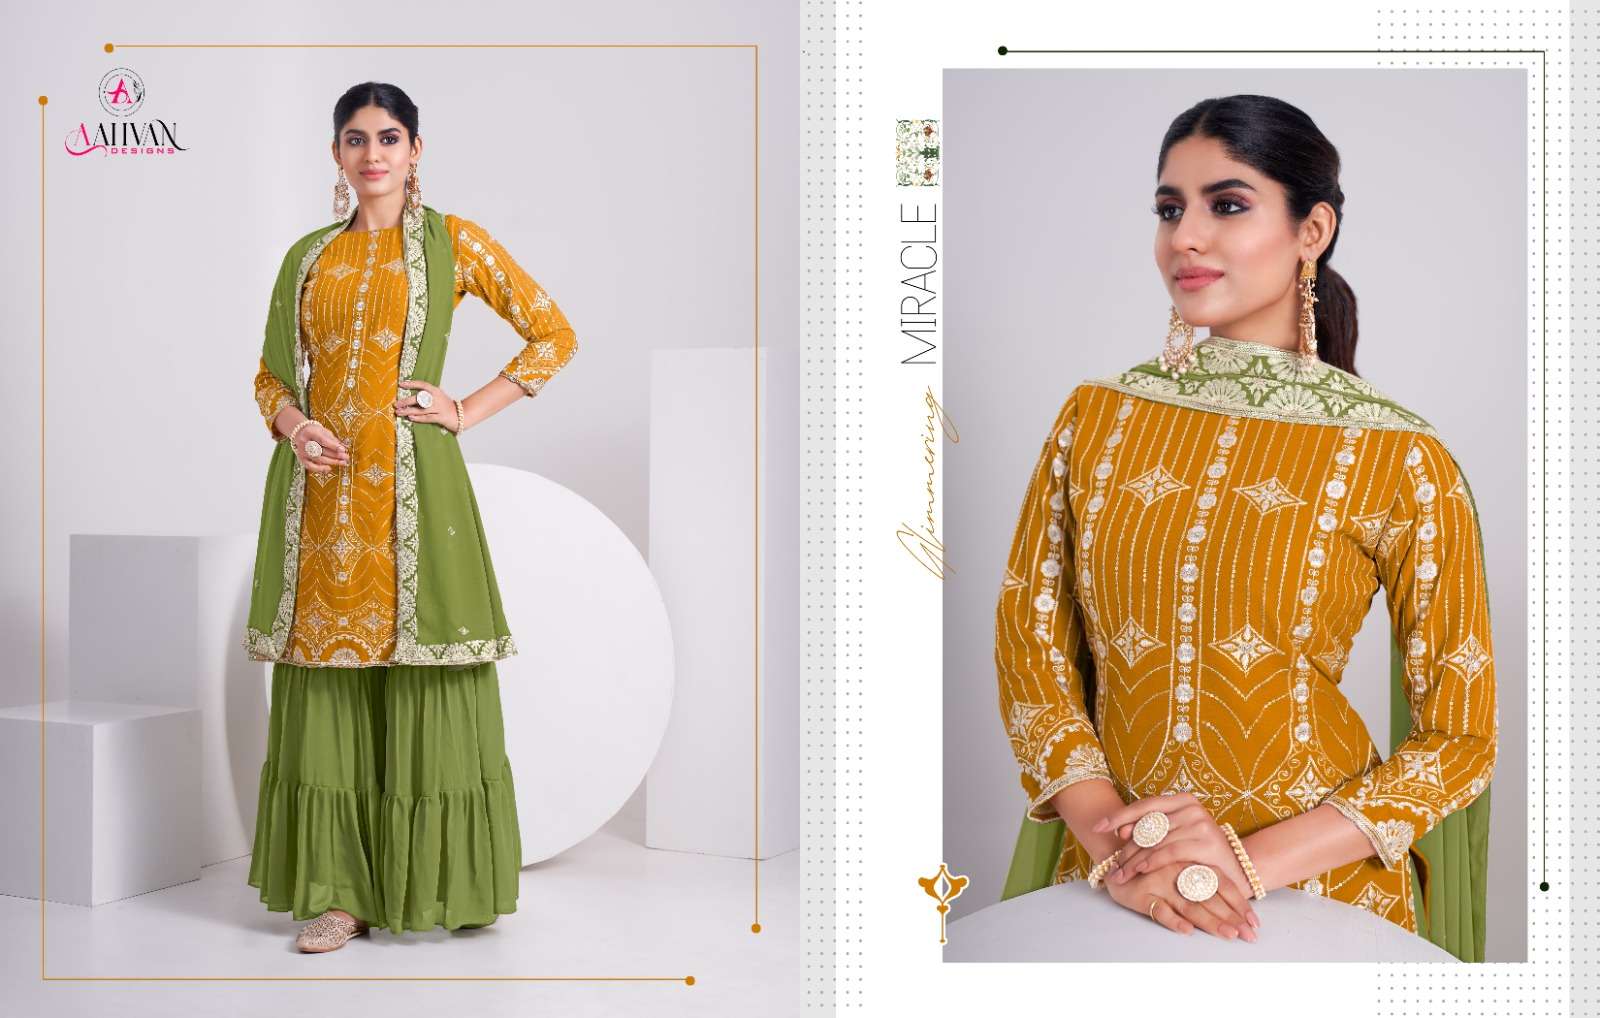 Paradise By Aahvan 6101 To 6104 Series Beautiful Stylish Sharara Suits Fancy Colorful Casual Wear & Ethnic Wear & Ready To Wear Heavy Faux Georgette Dresses At Wholesale Price